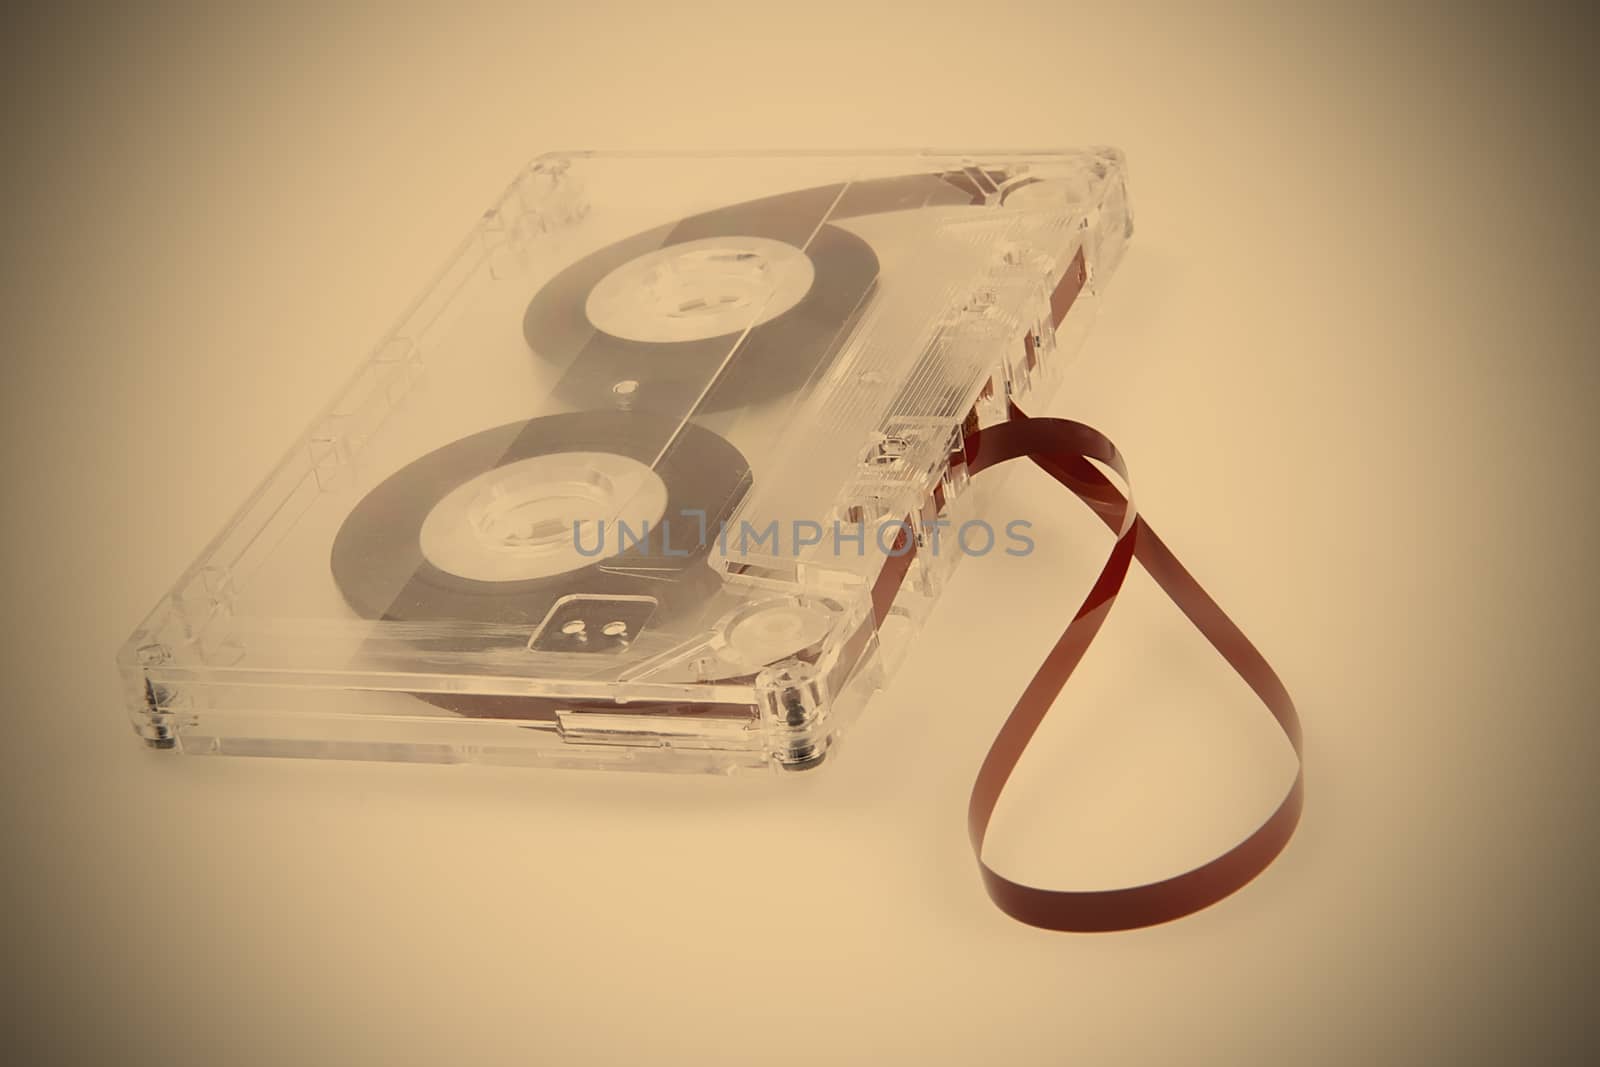 MAGTAPE, Retro, Analog carrier to Information, Plastic, TAPE REEL, Sound Film, Cassette for Record, instagram image style